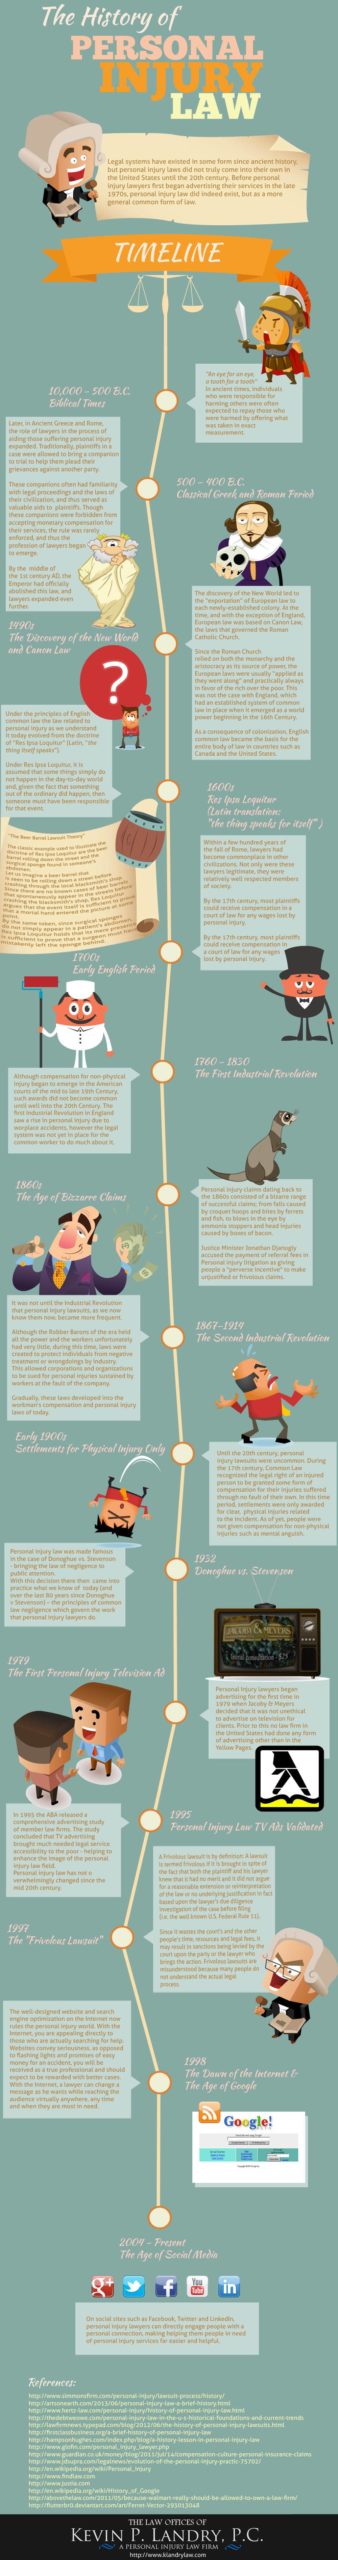 History of personal injury law infographic.